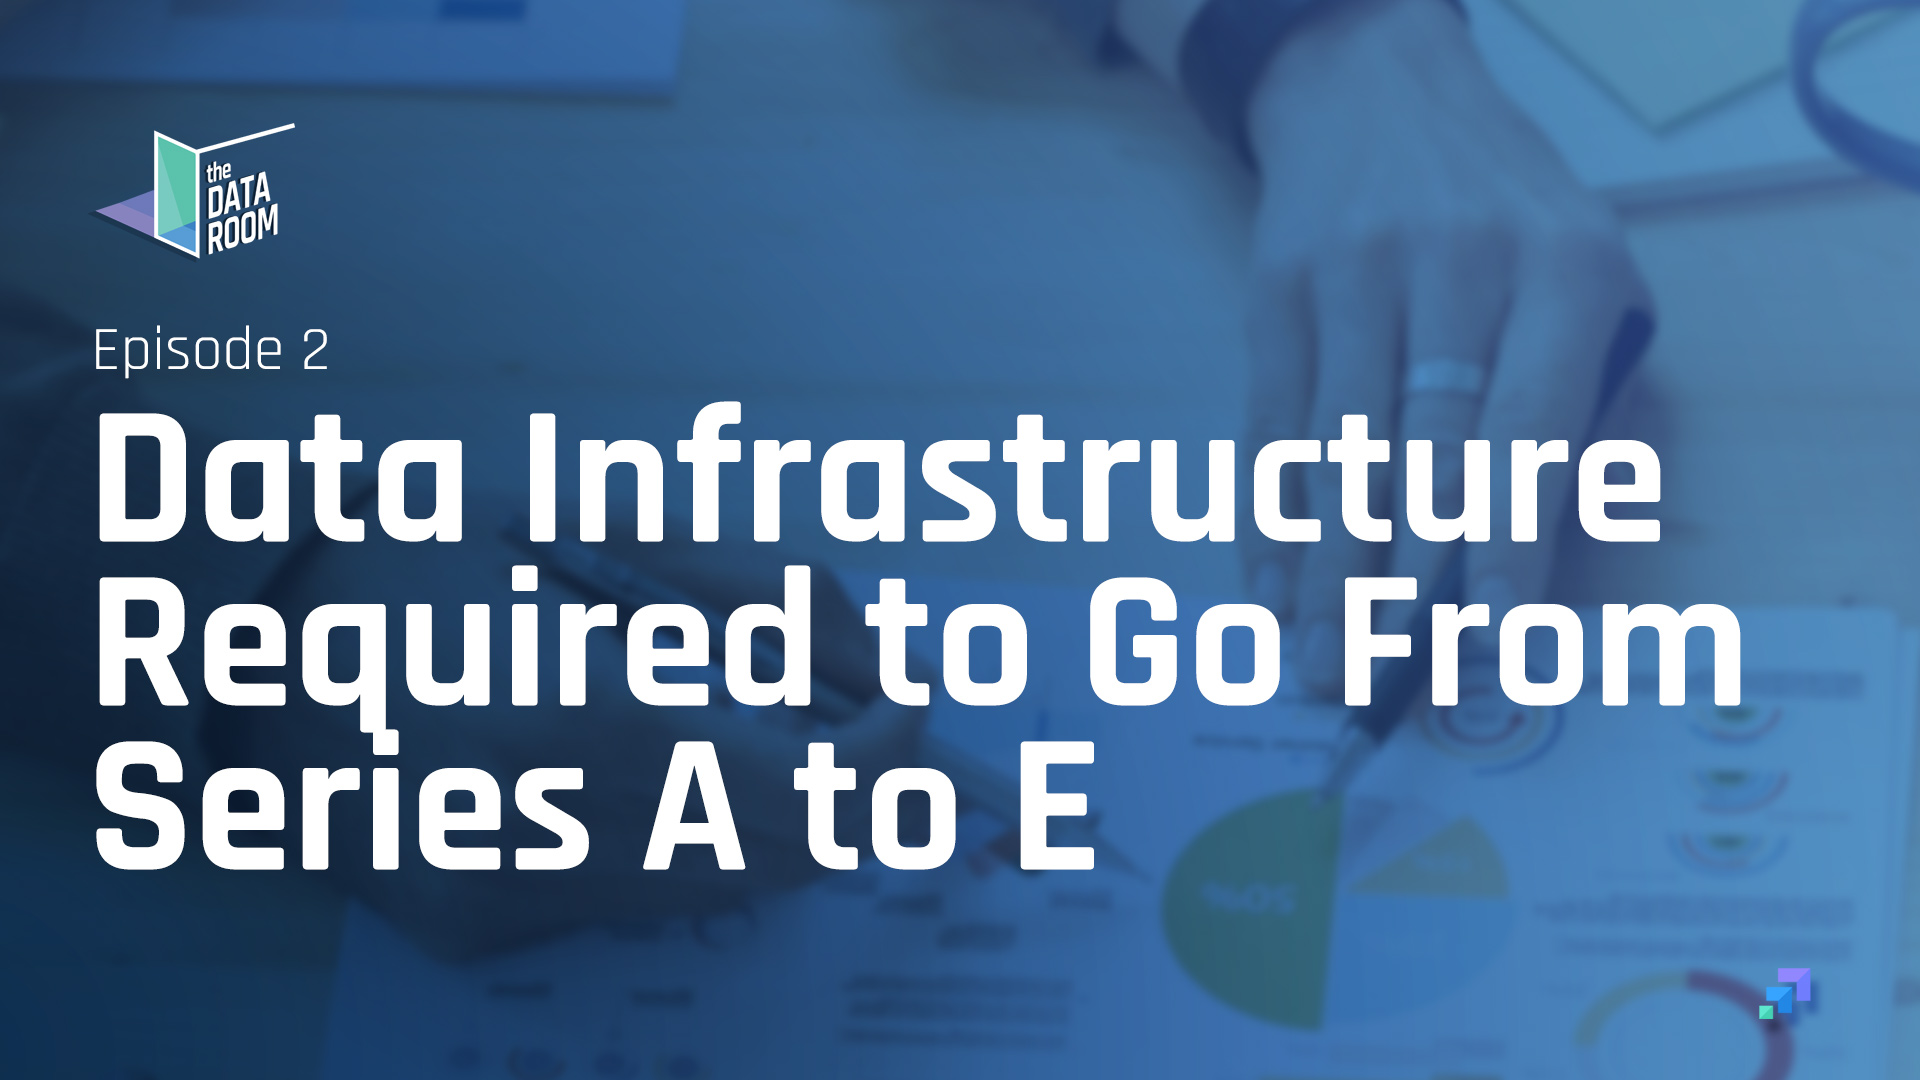 Data Infrastructure Required to Go From Series A to E